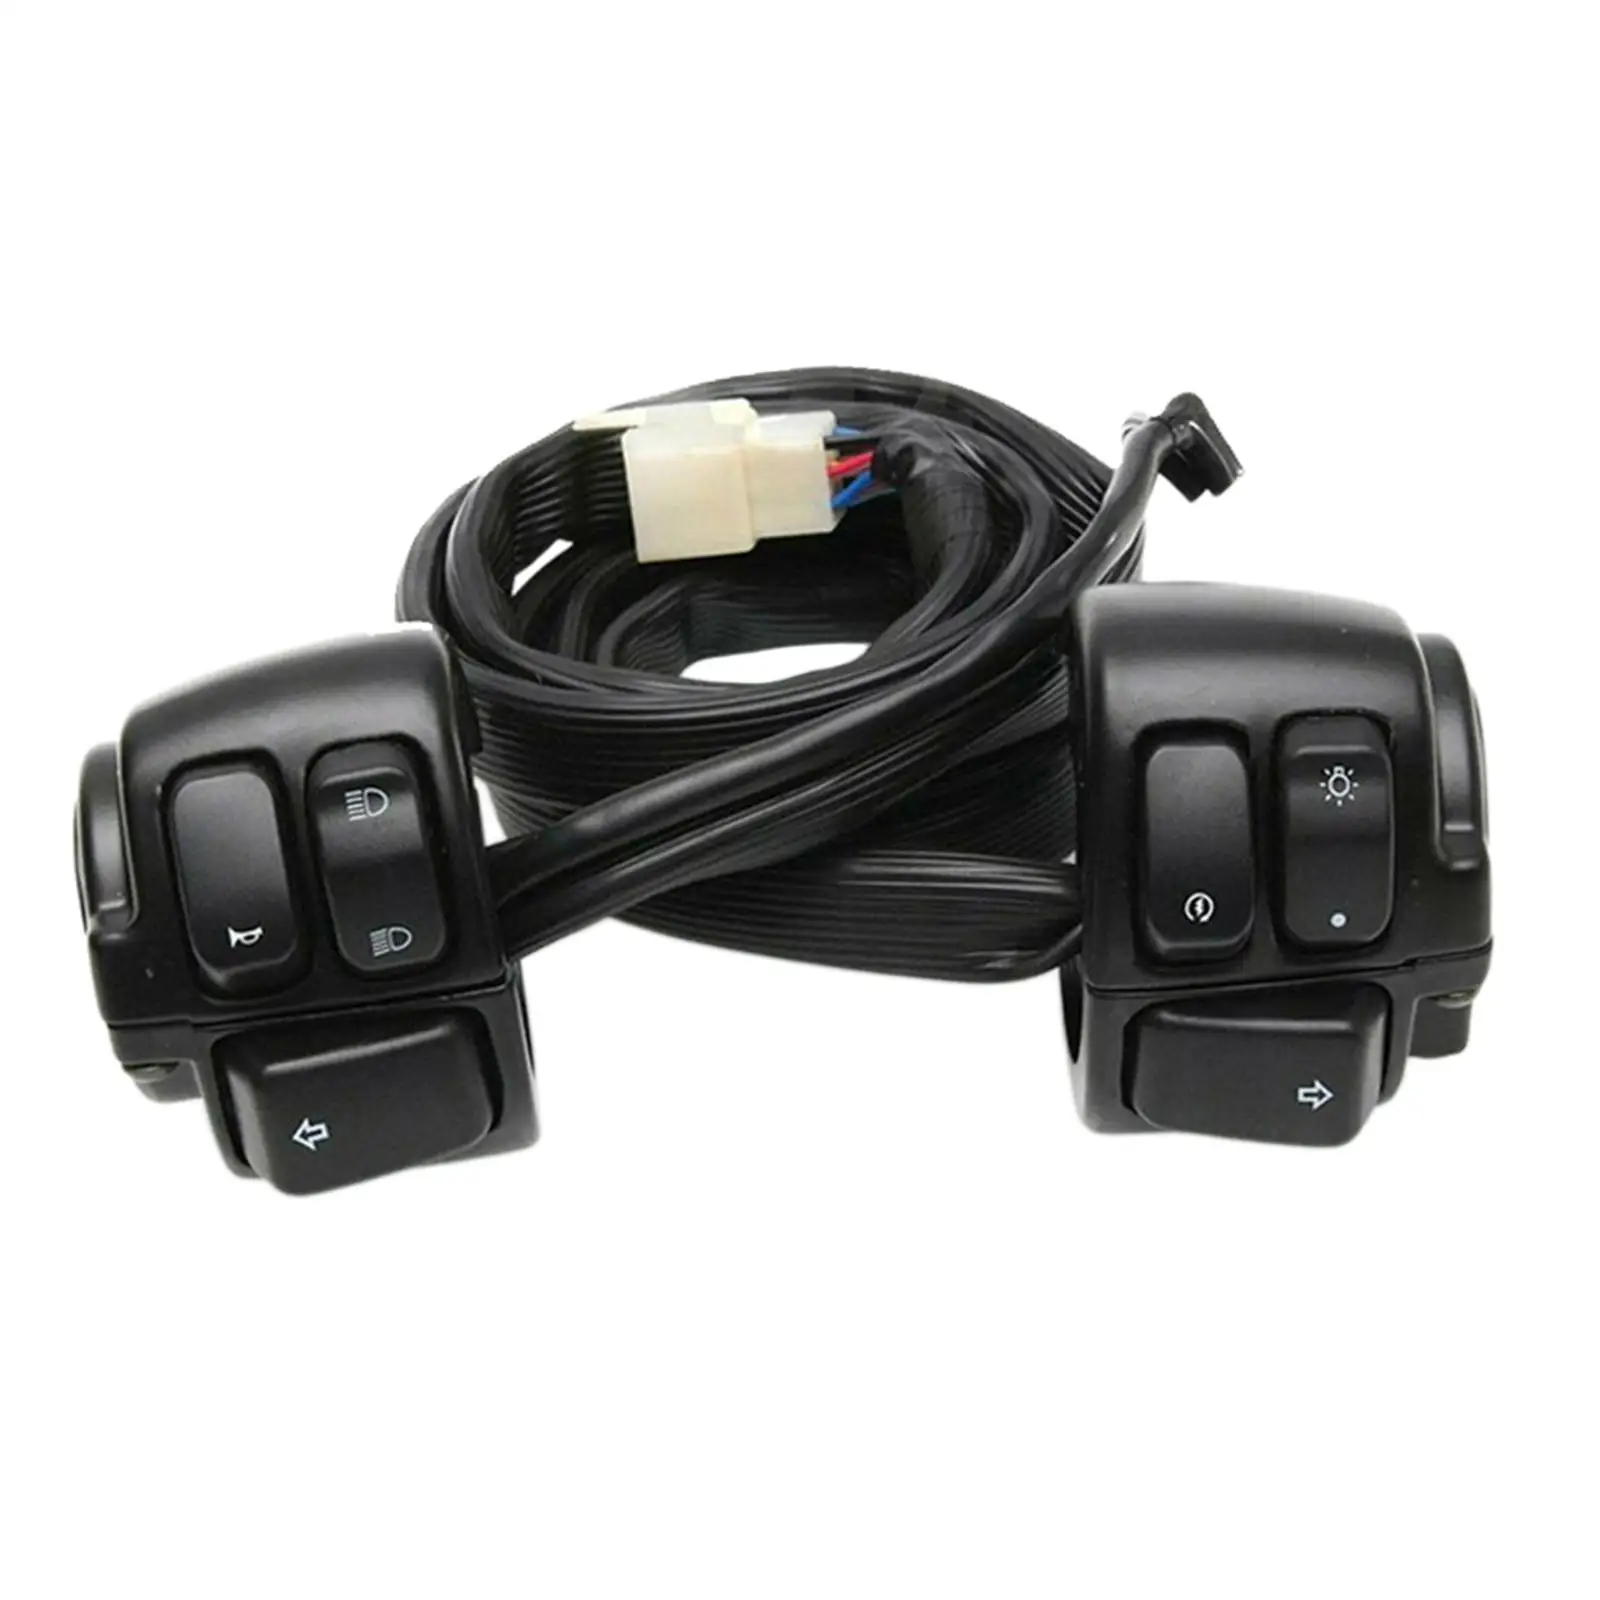  Motorcycle 25mm Handlebar Control Switch with Wiring Harness Fit for 1200 Replacement on- ,Easy to Install Waterproof